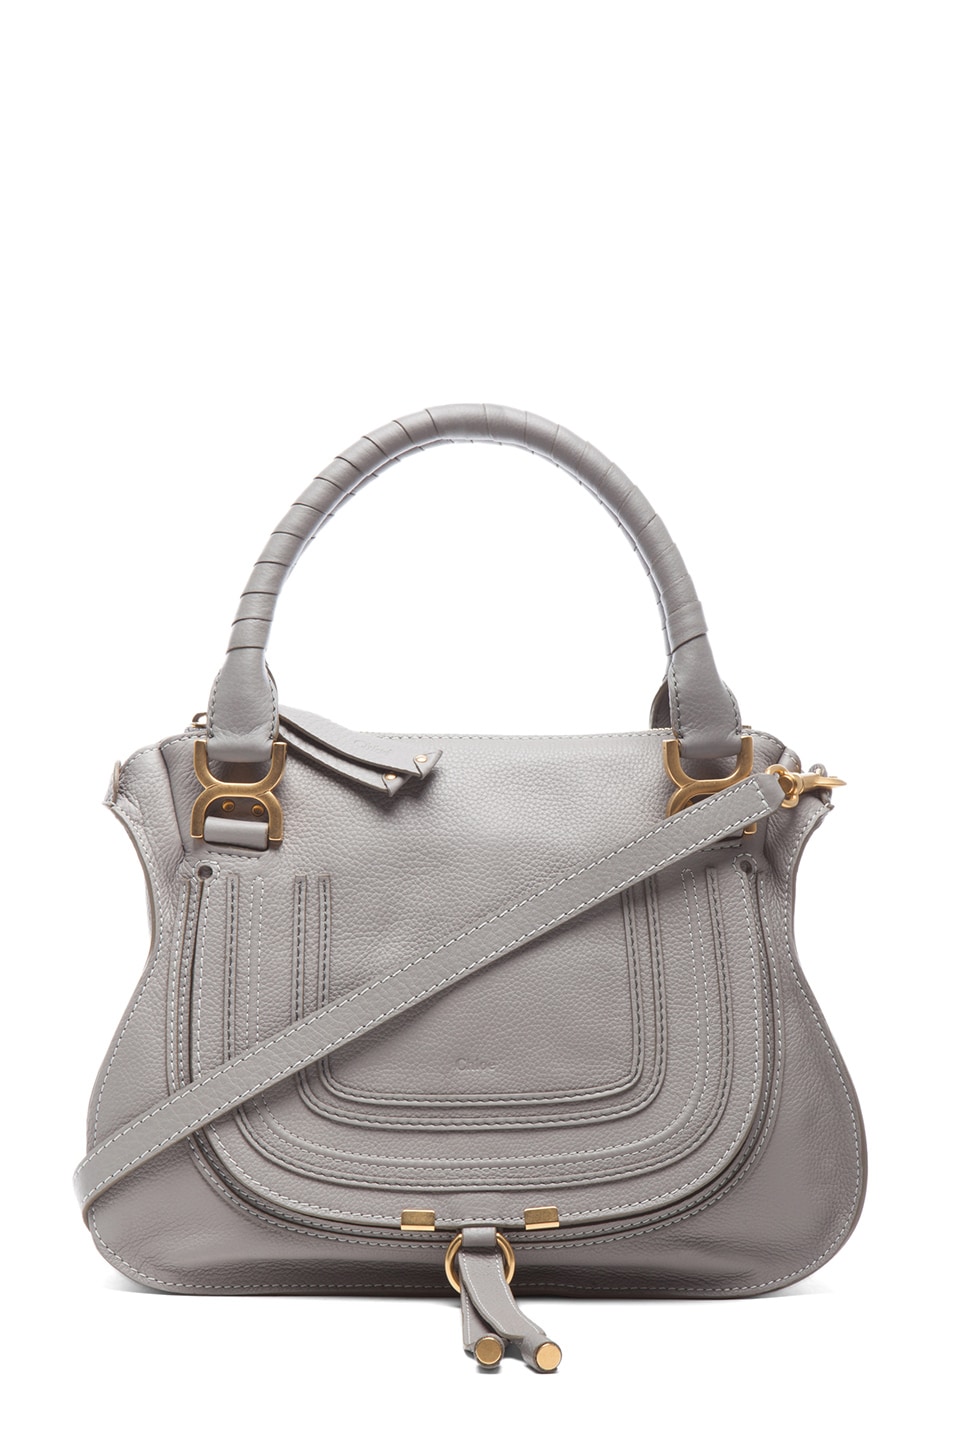 Chloe Small Marcie Grained Leather Satchel in Cashmere Grey | FWRD